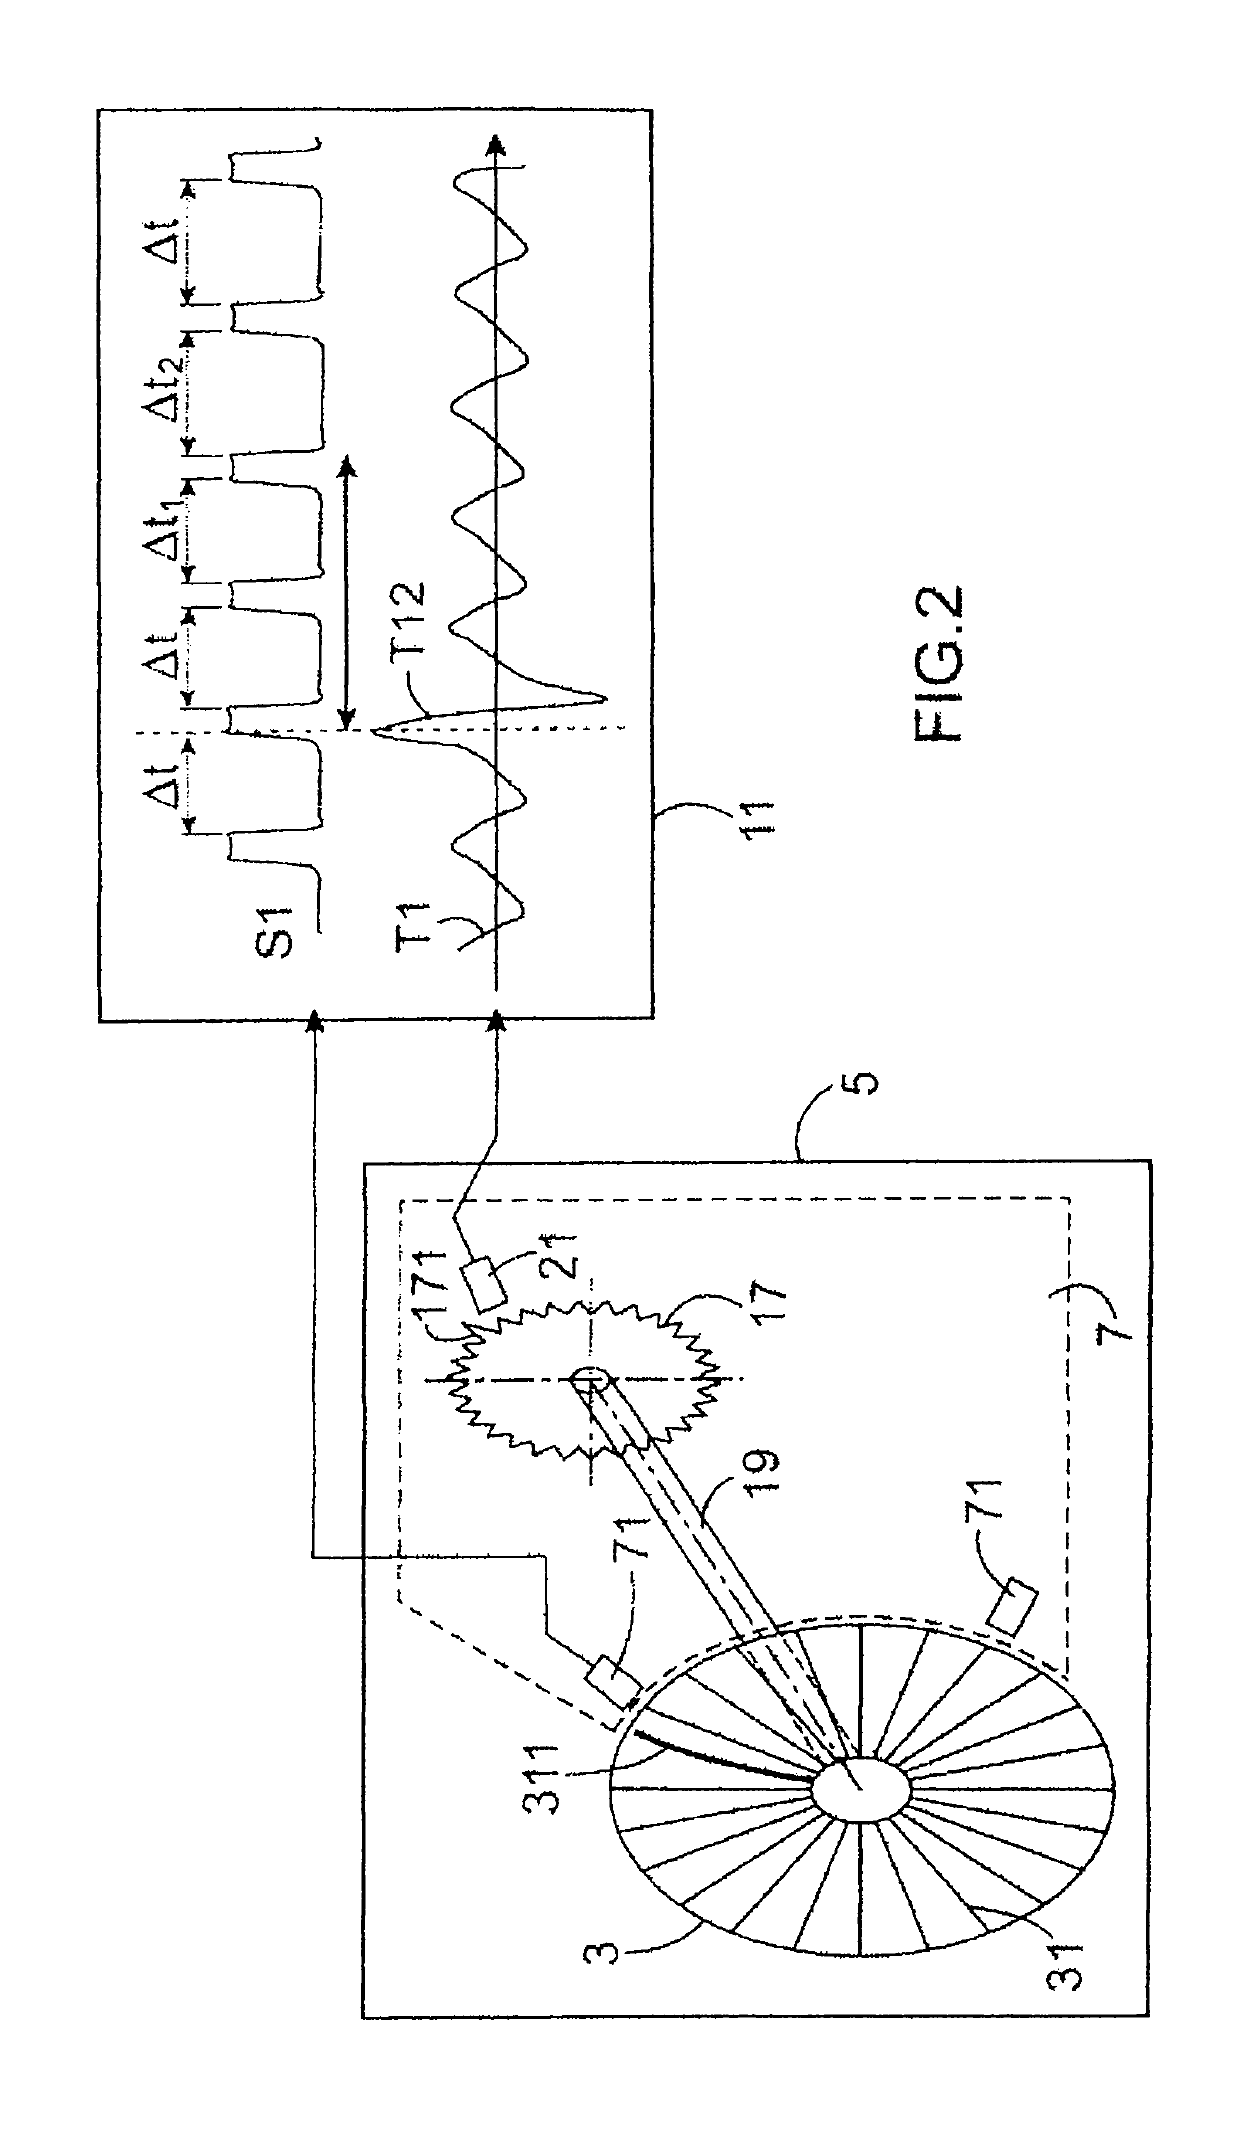 System for detecting an ephemeral event on a vane impeller of an aircraft engine